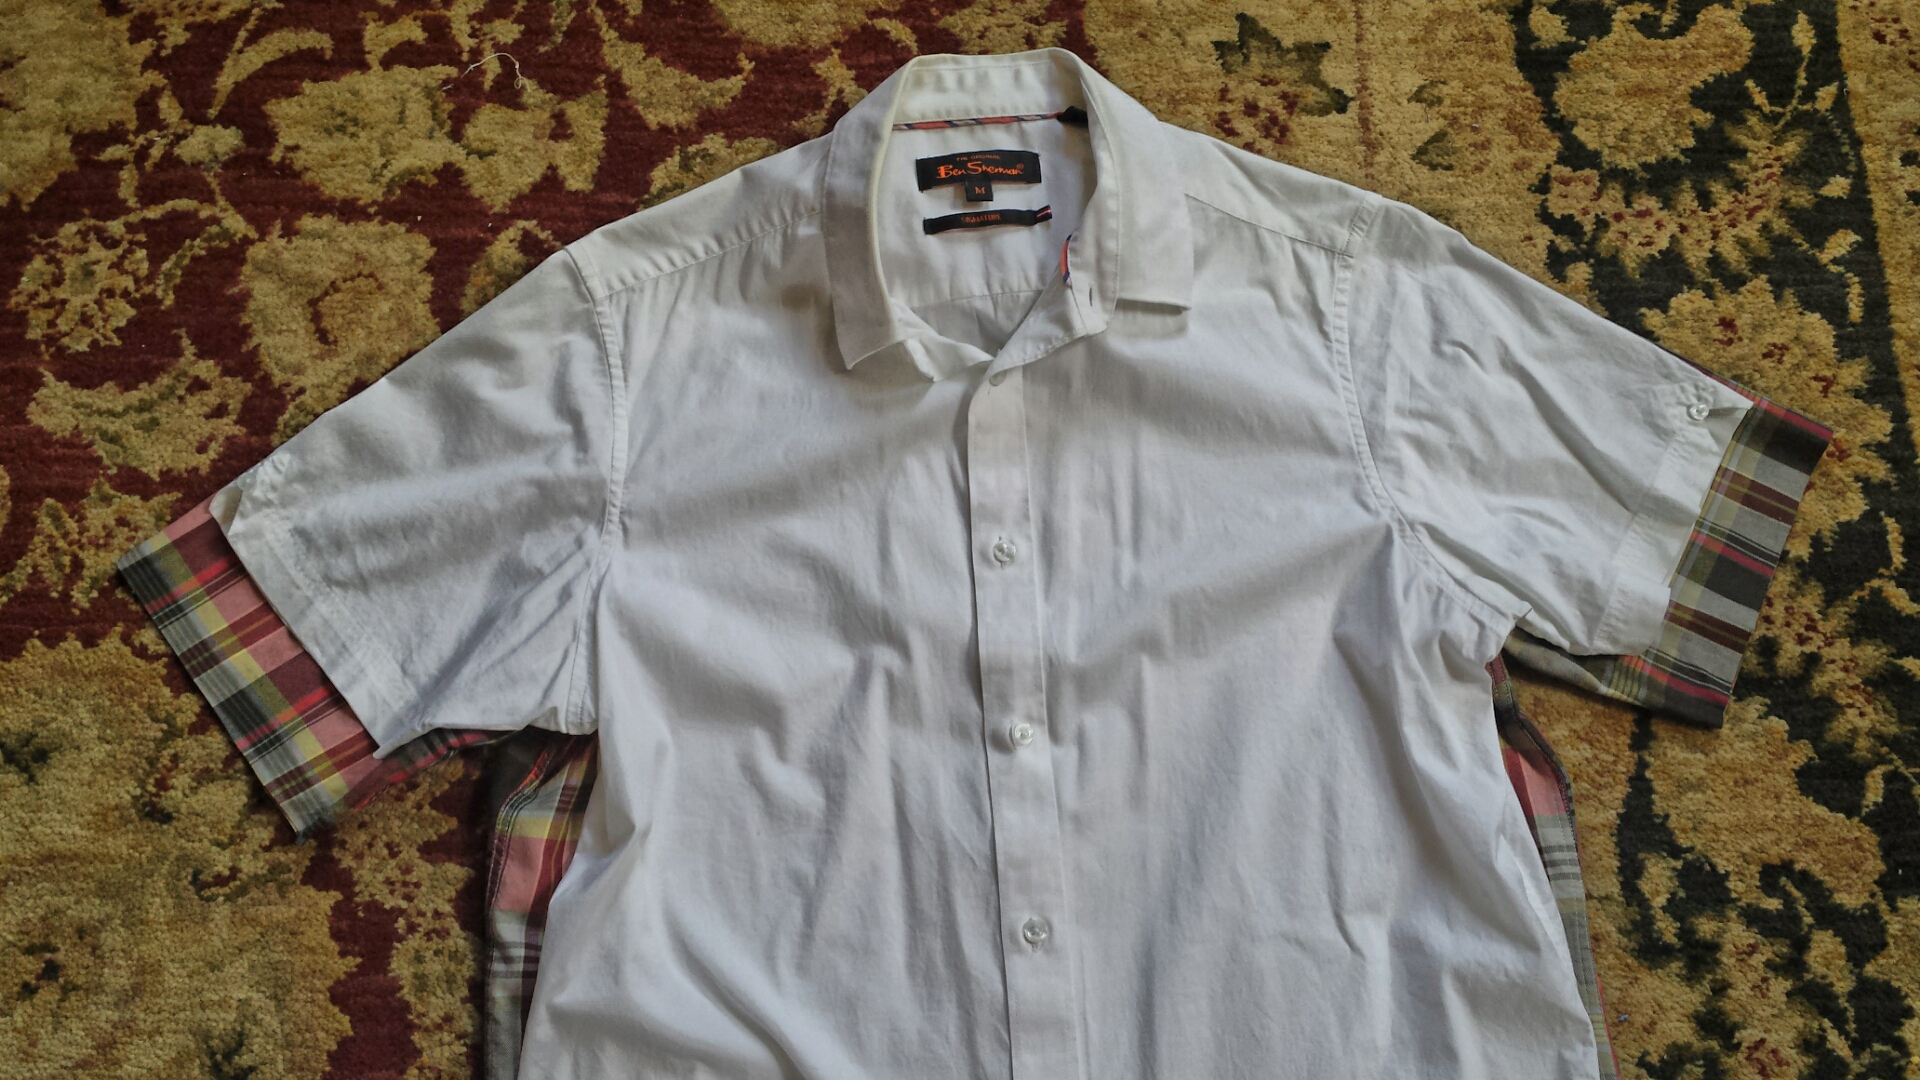 How to Turn a Long Sleeve Shirt Into Short Sleeves, Blog